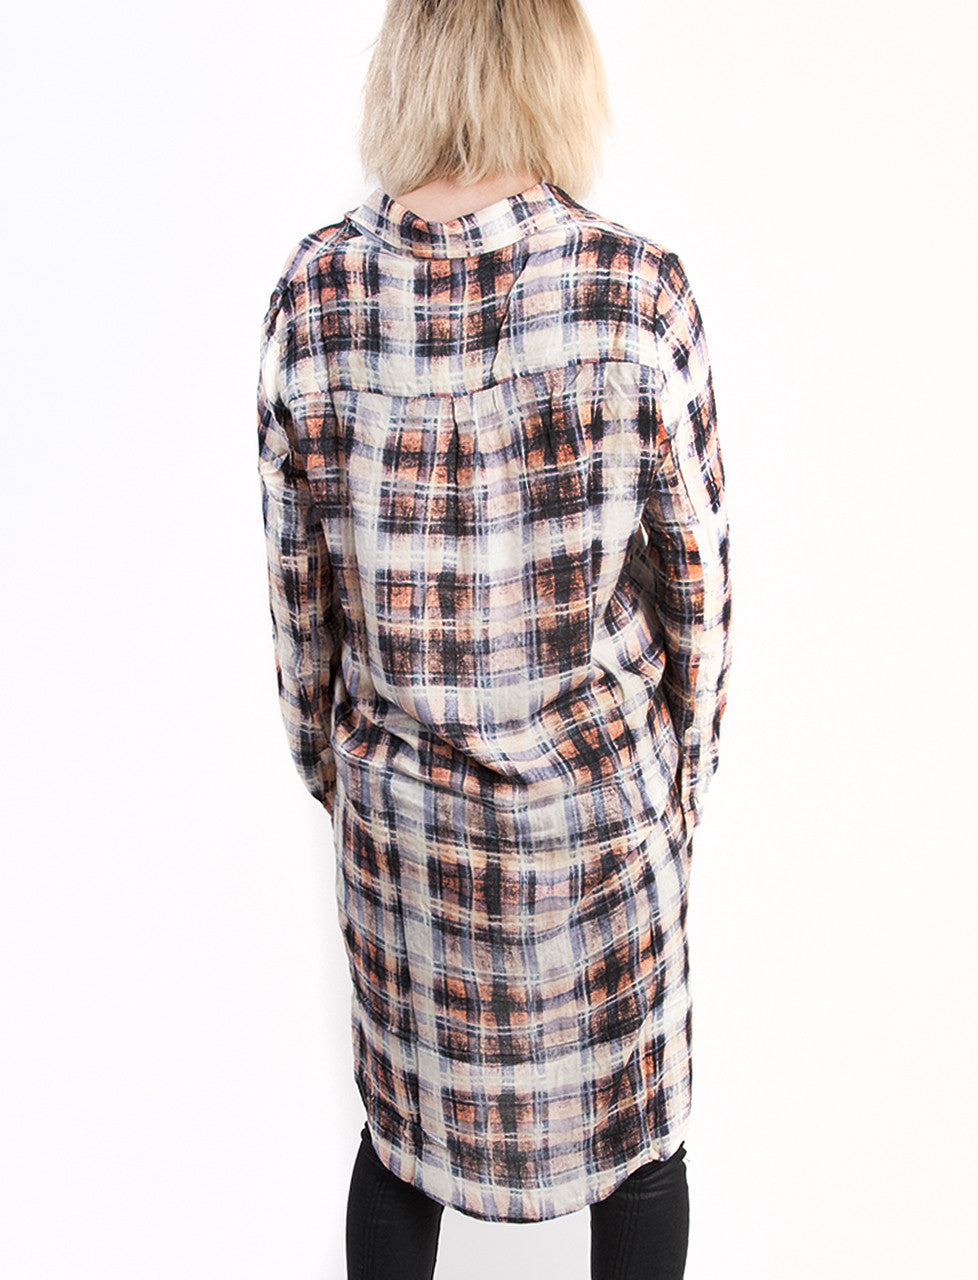 evil twin the label faded glory longline shirt dress, high low shirt dress, plaid shirt plaid back view